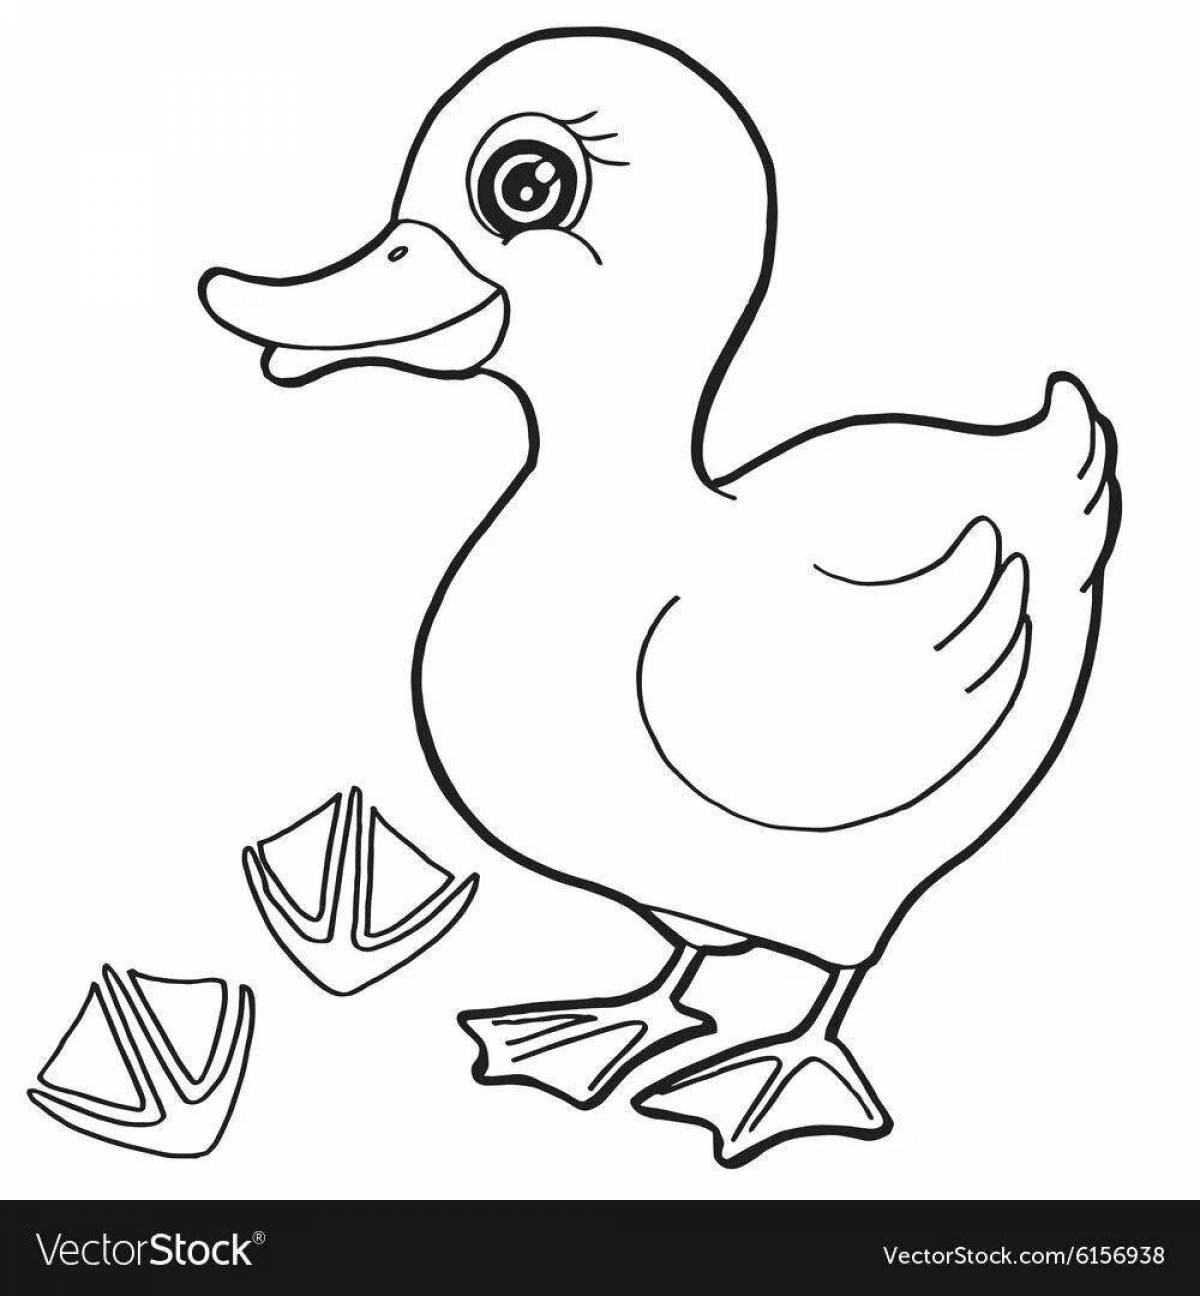 Entertaining coloring template Dymkovo toy duck